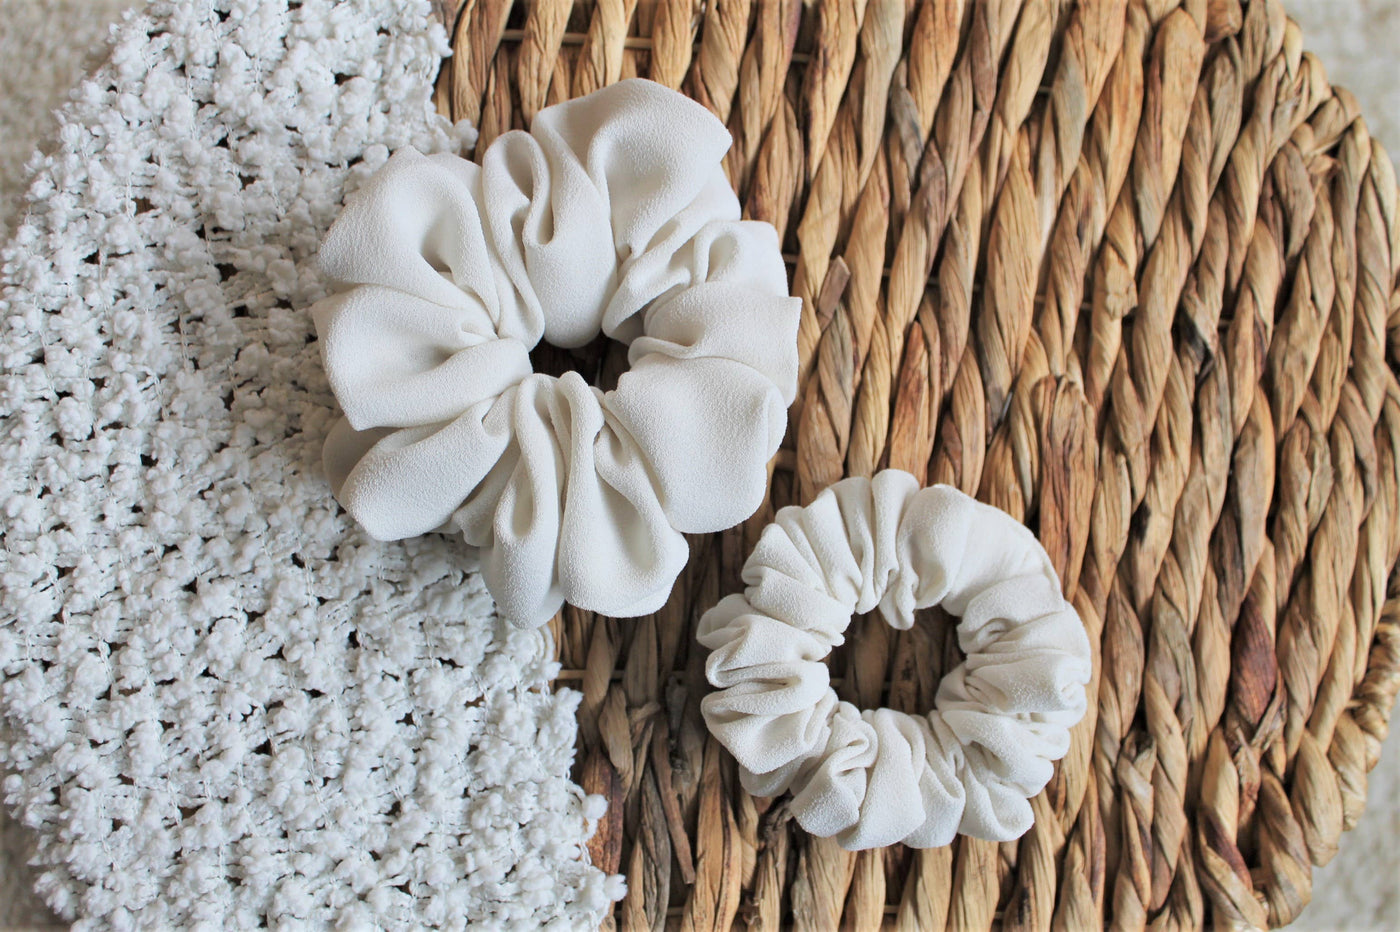 OFF WHITE SCRUNCHIE - regular or luxe